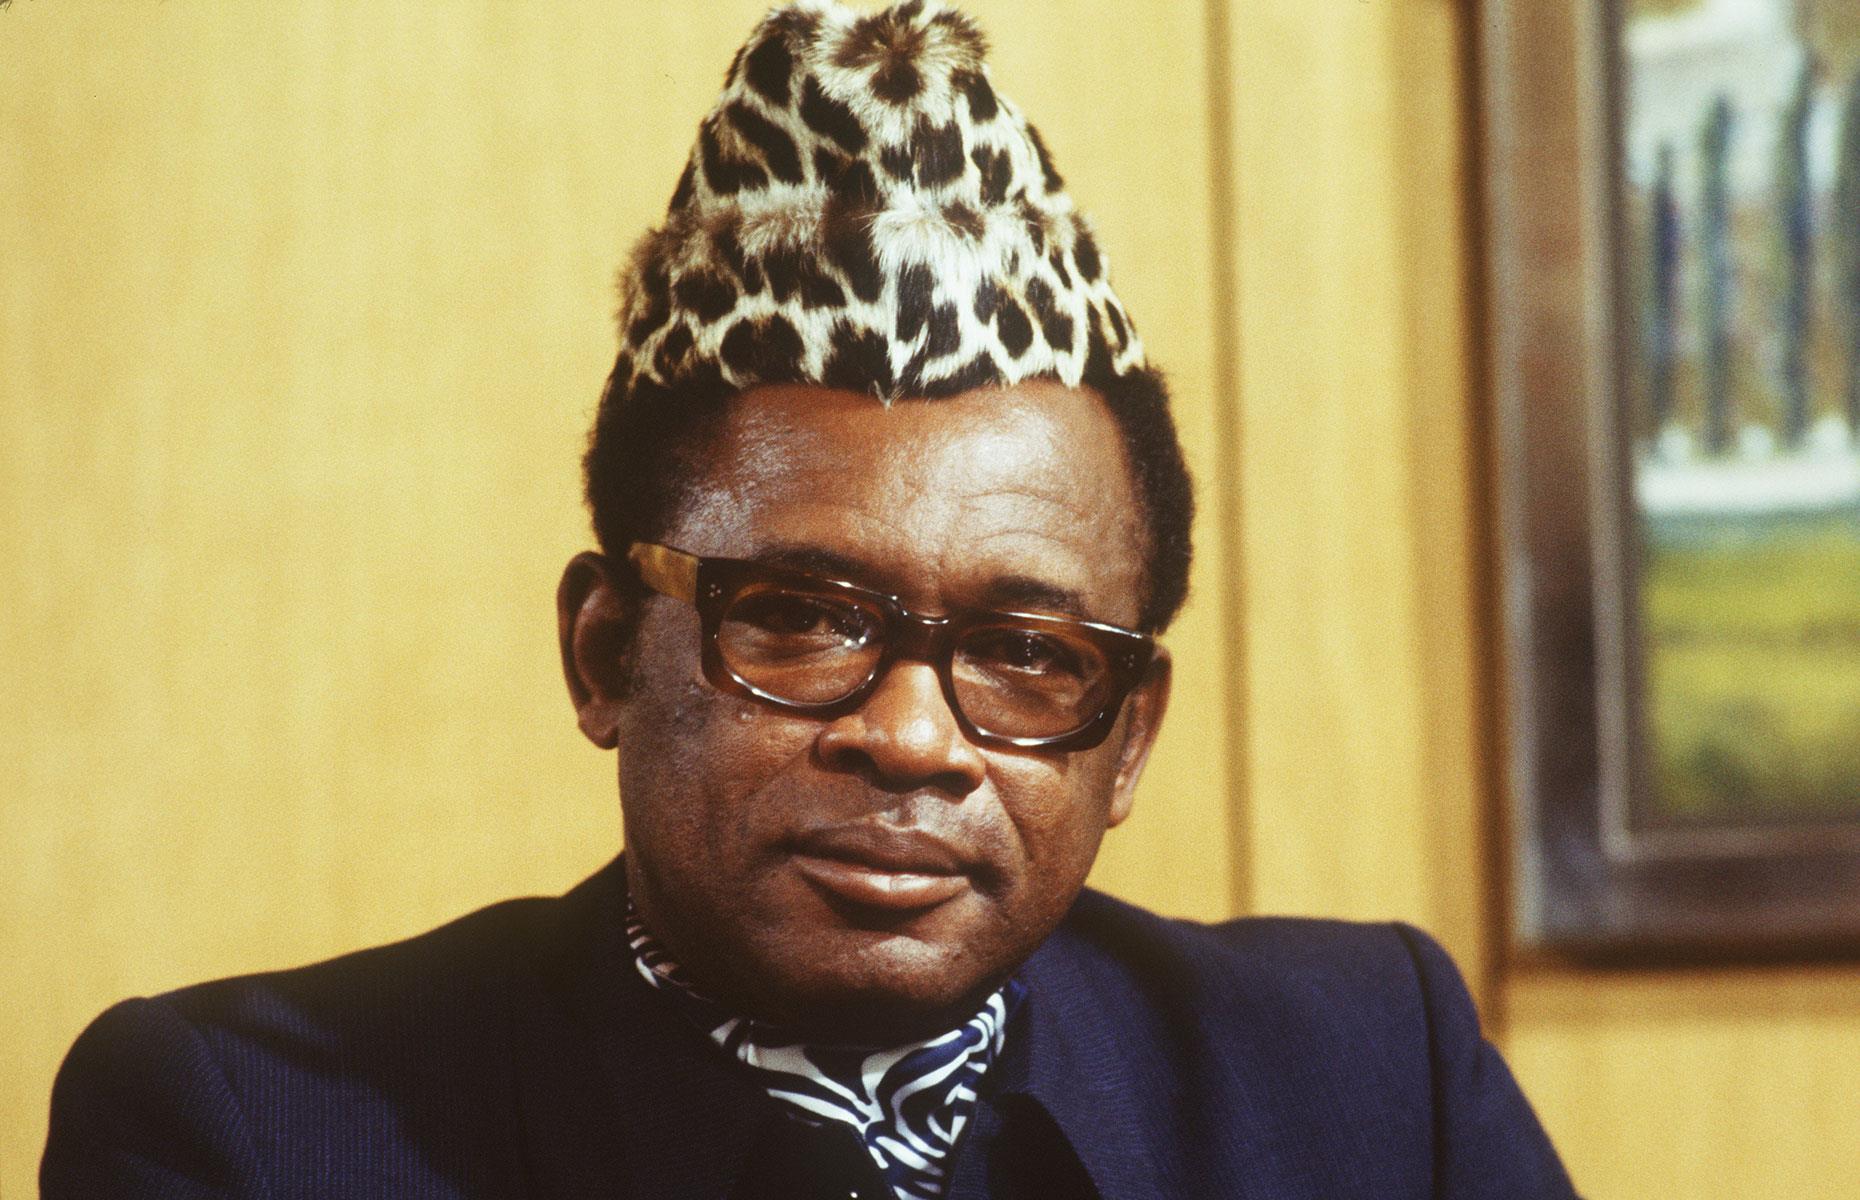 <p>Mobutu Sese Seko was president of Zaire, now the Democratic Republic of the Congo, from 1965 to 1997. Just as free and easy with his people's money as the other dictators in our round-up, the despotic leader helped himself to $5 billion, as estimated in 1984. That's the equivalent of $12 billion in today's money. He owned palaces in Zaire as well as grand residences in Paris and Switzerland, and was partial to luxuries including vintage rosé champagne.</p>